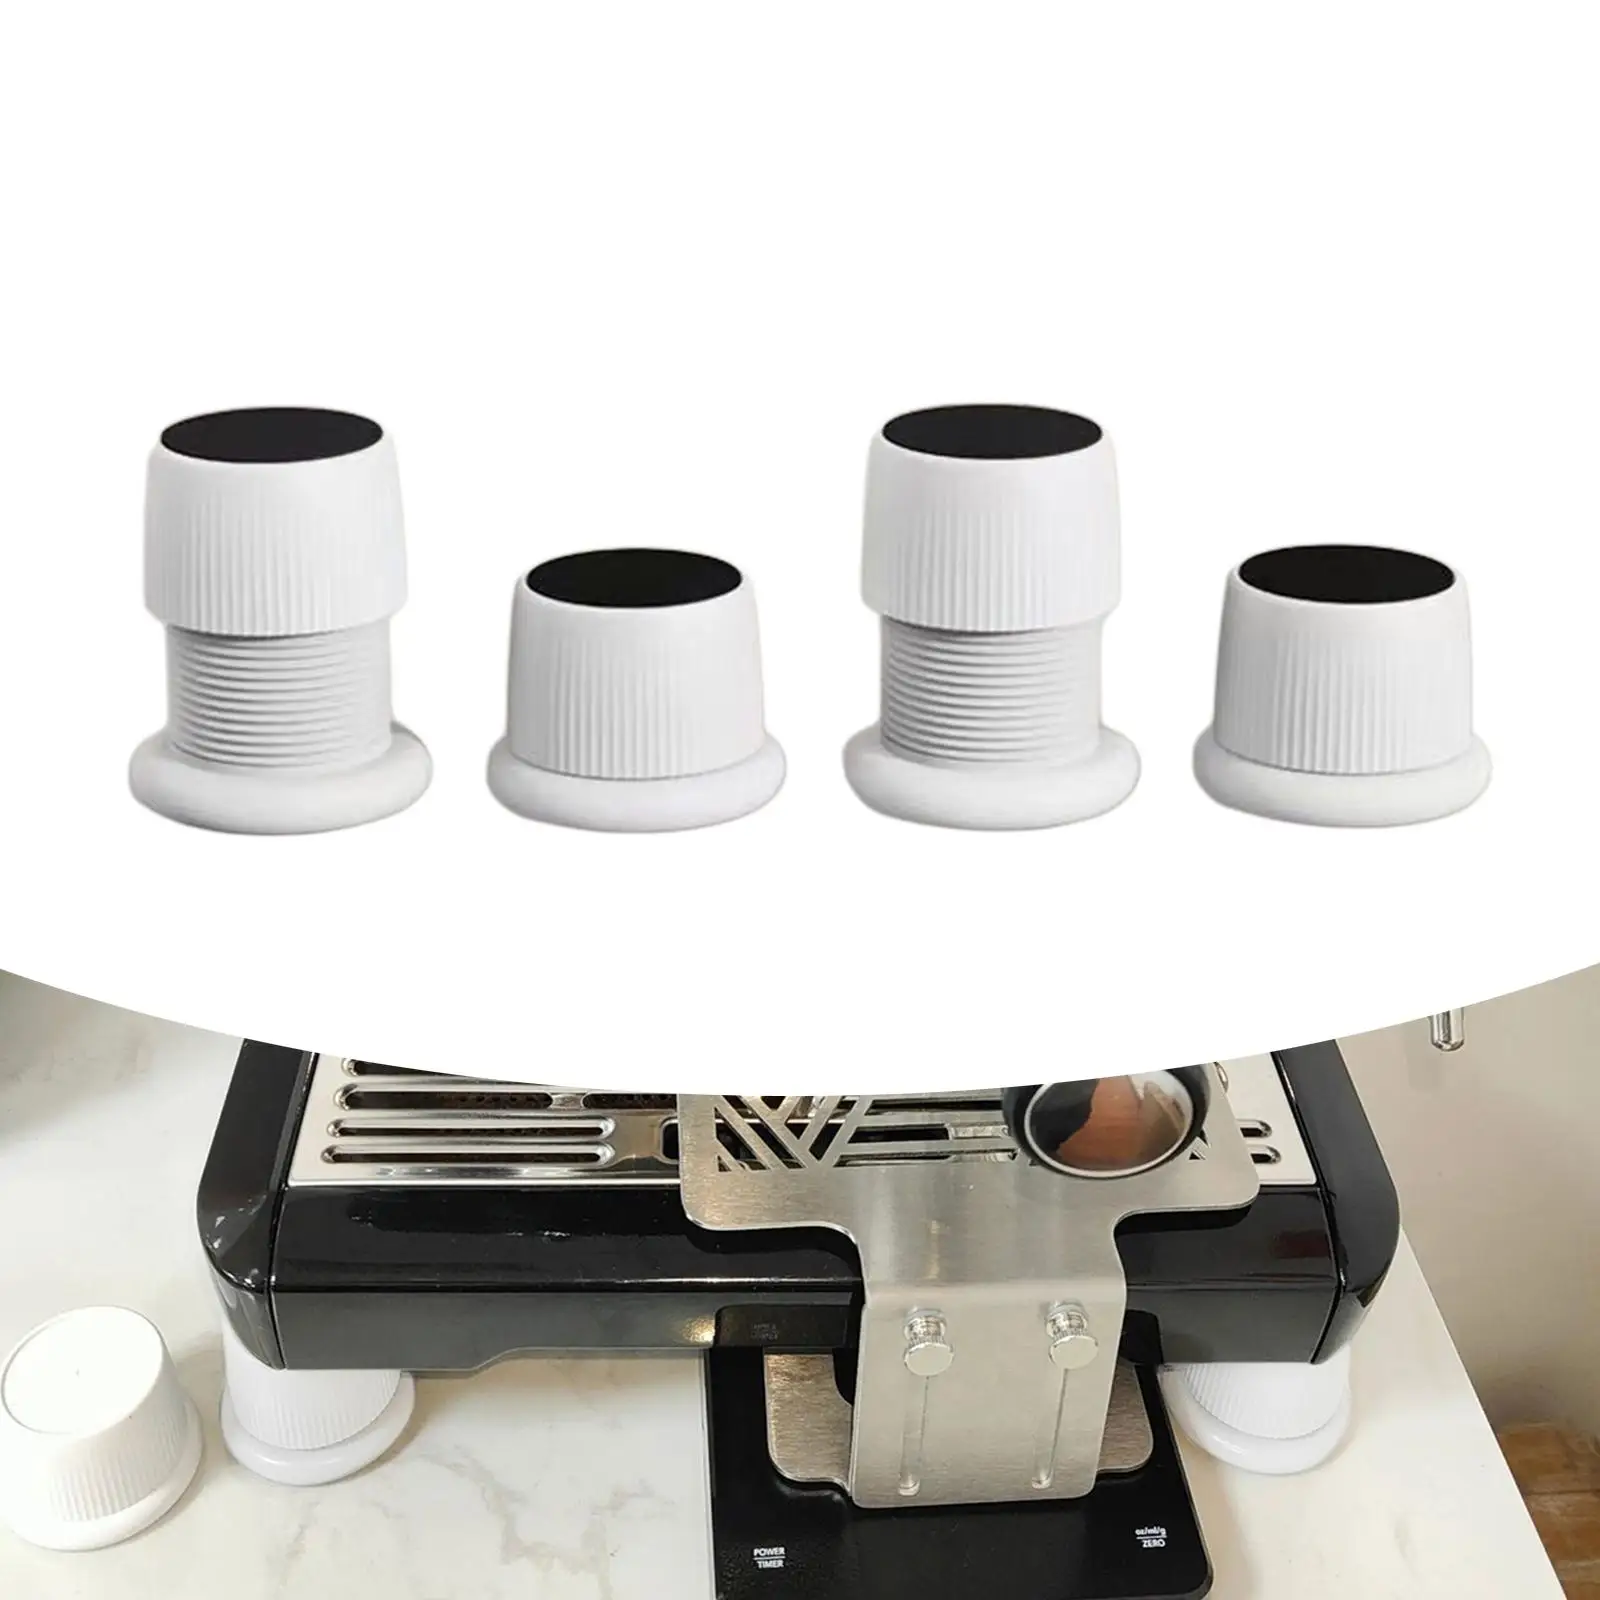 4 Pieces Heighten Anti Vibration Pads Shock Absorber Anti Walk Anti Slip Support Protects Pedestals Foot Pads for Coffee Machine